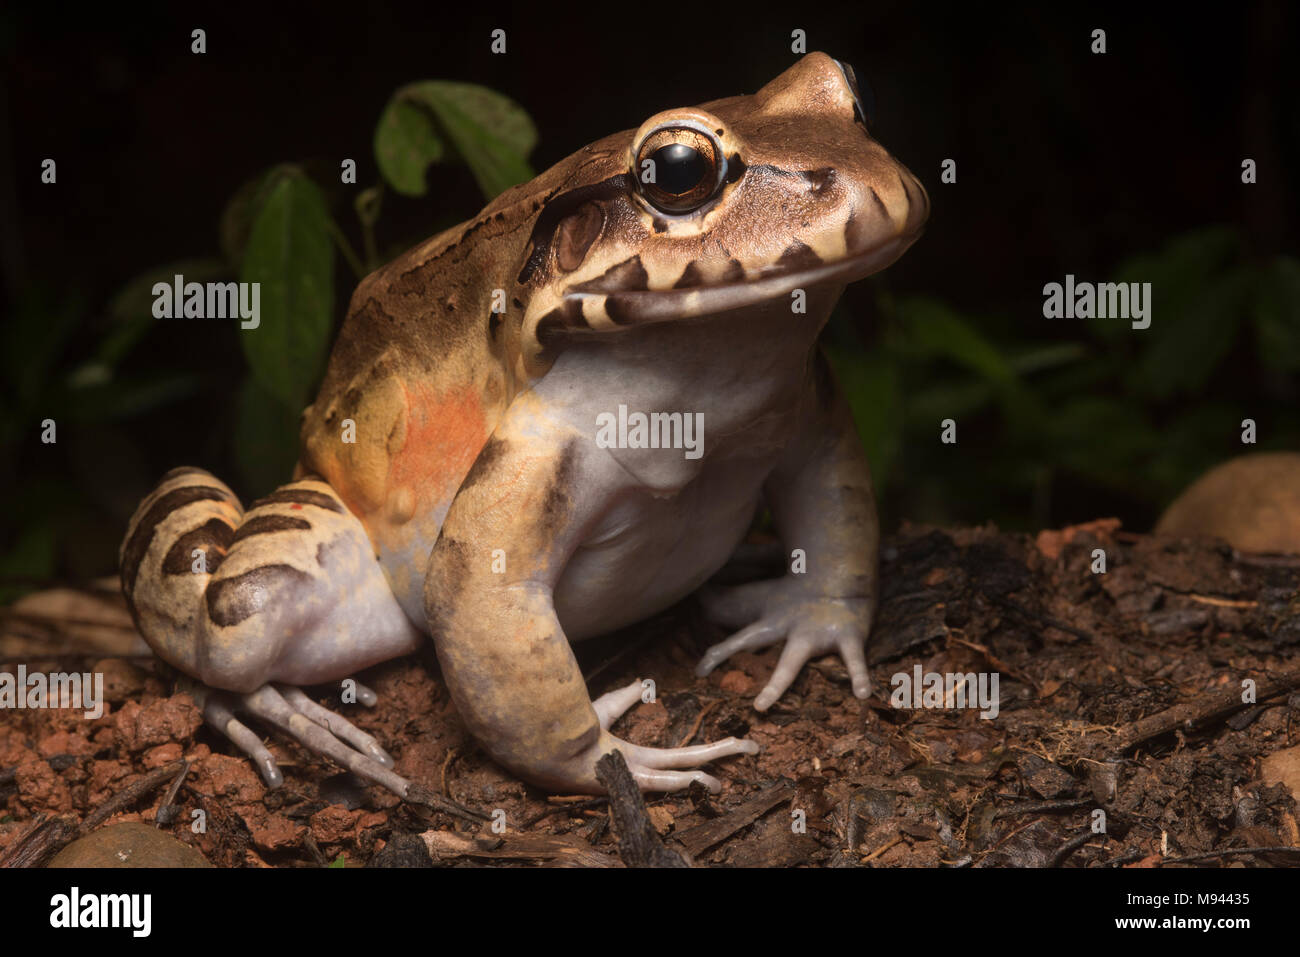 The smoky jungle frog (Leptodactylus pentadactylus) is the largest frog species in its range, it sits on the forest floor and eats smaller prey. Stock Photo